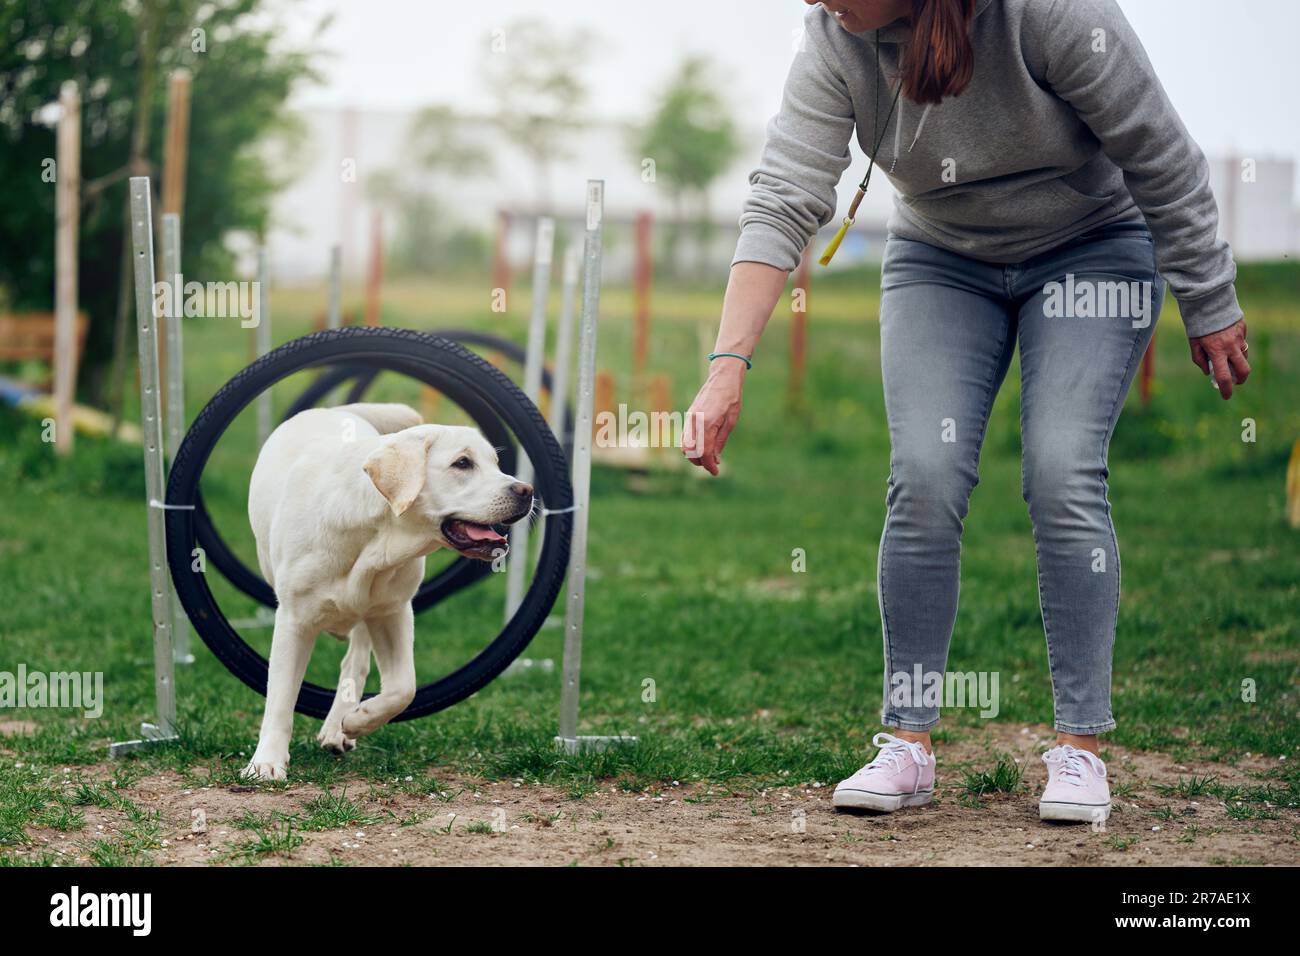 Woman mistress playing with her dog agility walking through rings or tires as an obstacle Stock Photo